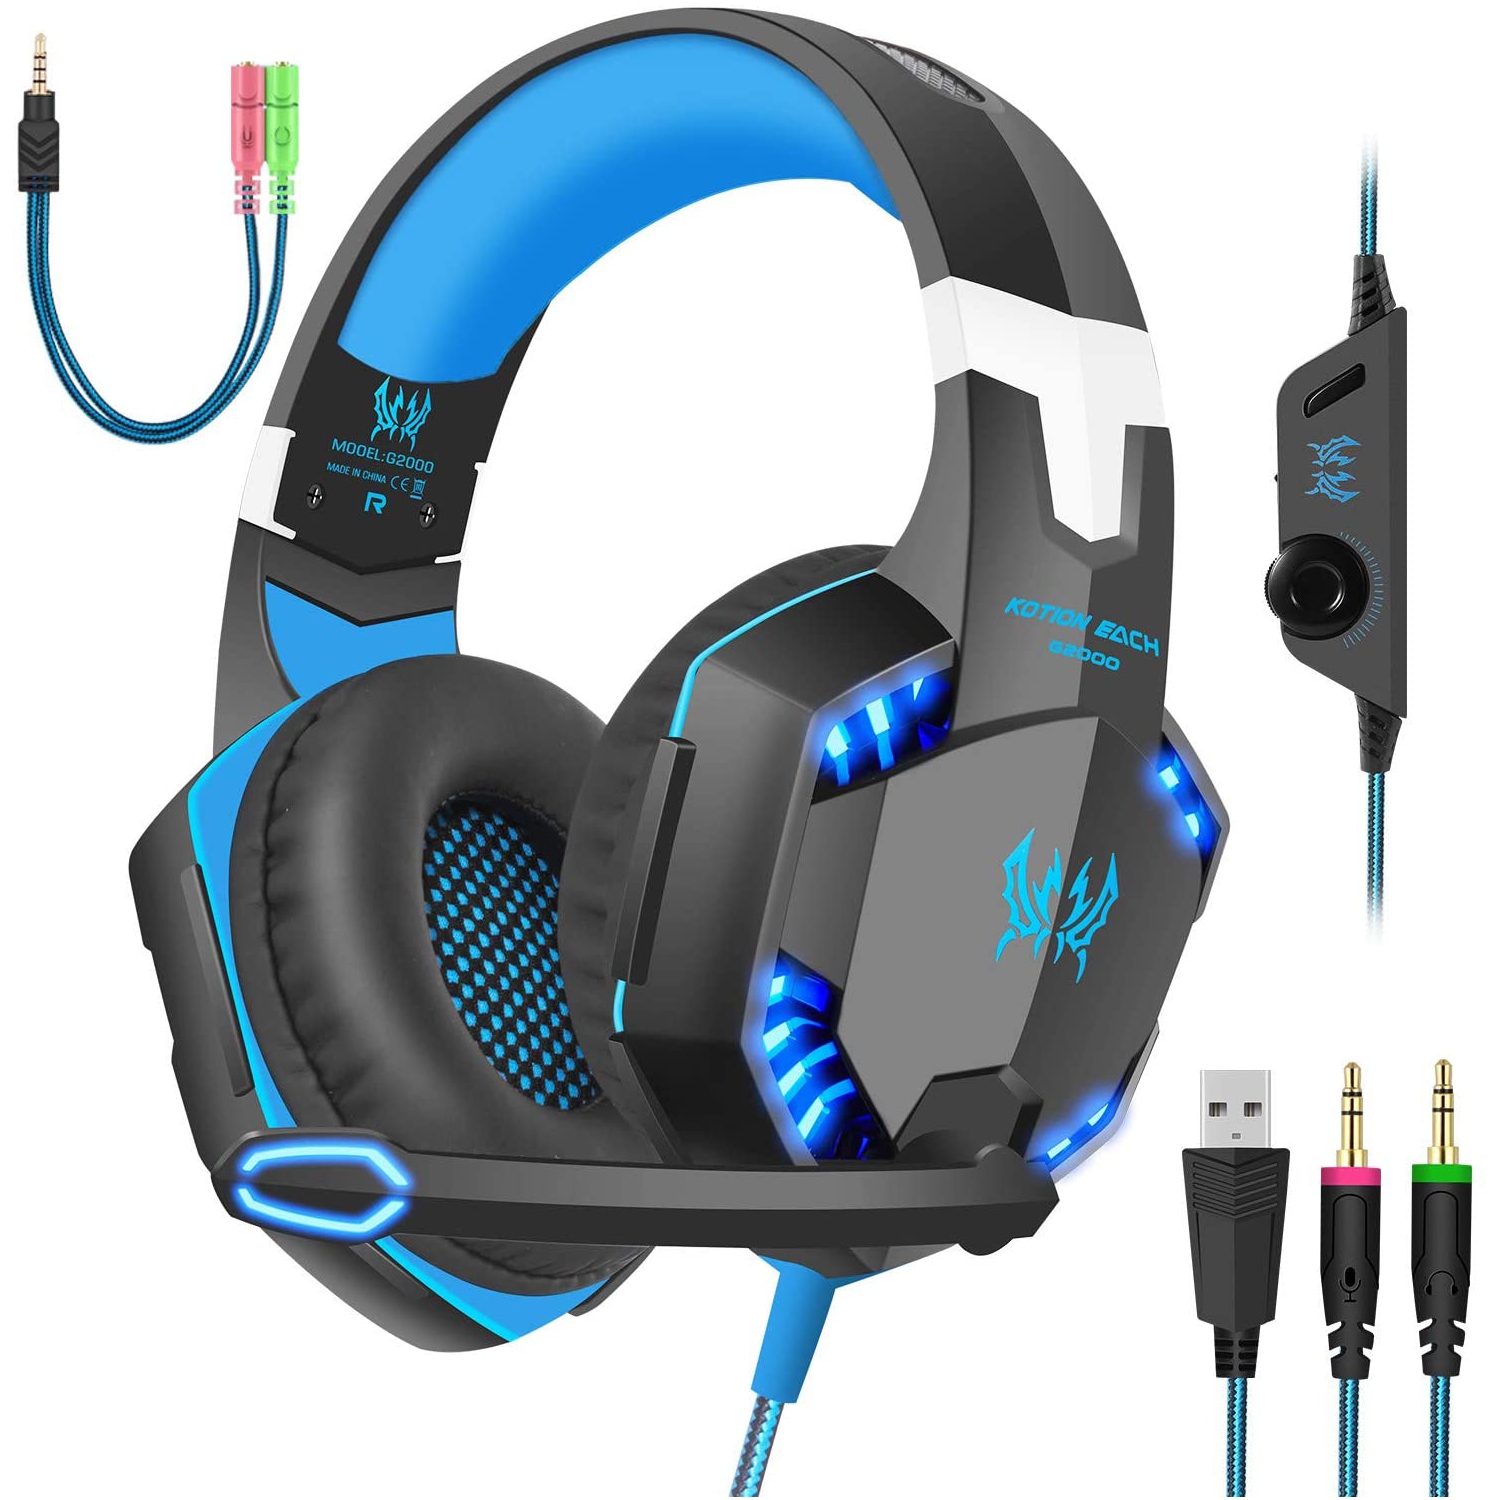 Gaming Headset with Mic for PC,PS4,Xbox One,Over-ear Headphones with Volume Control LED Light Cool Style Stereo,Noise